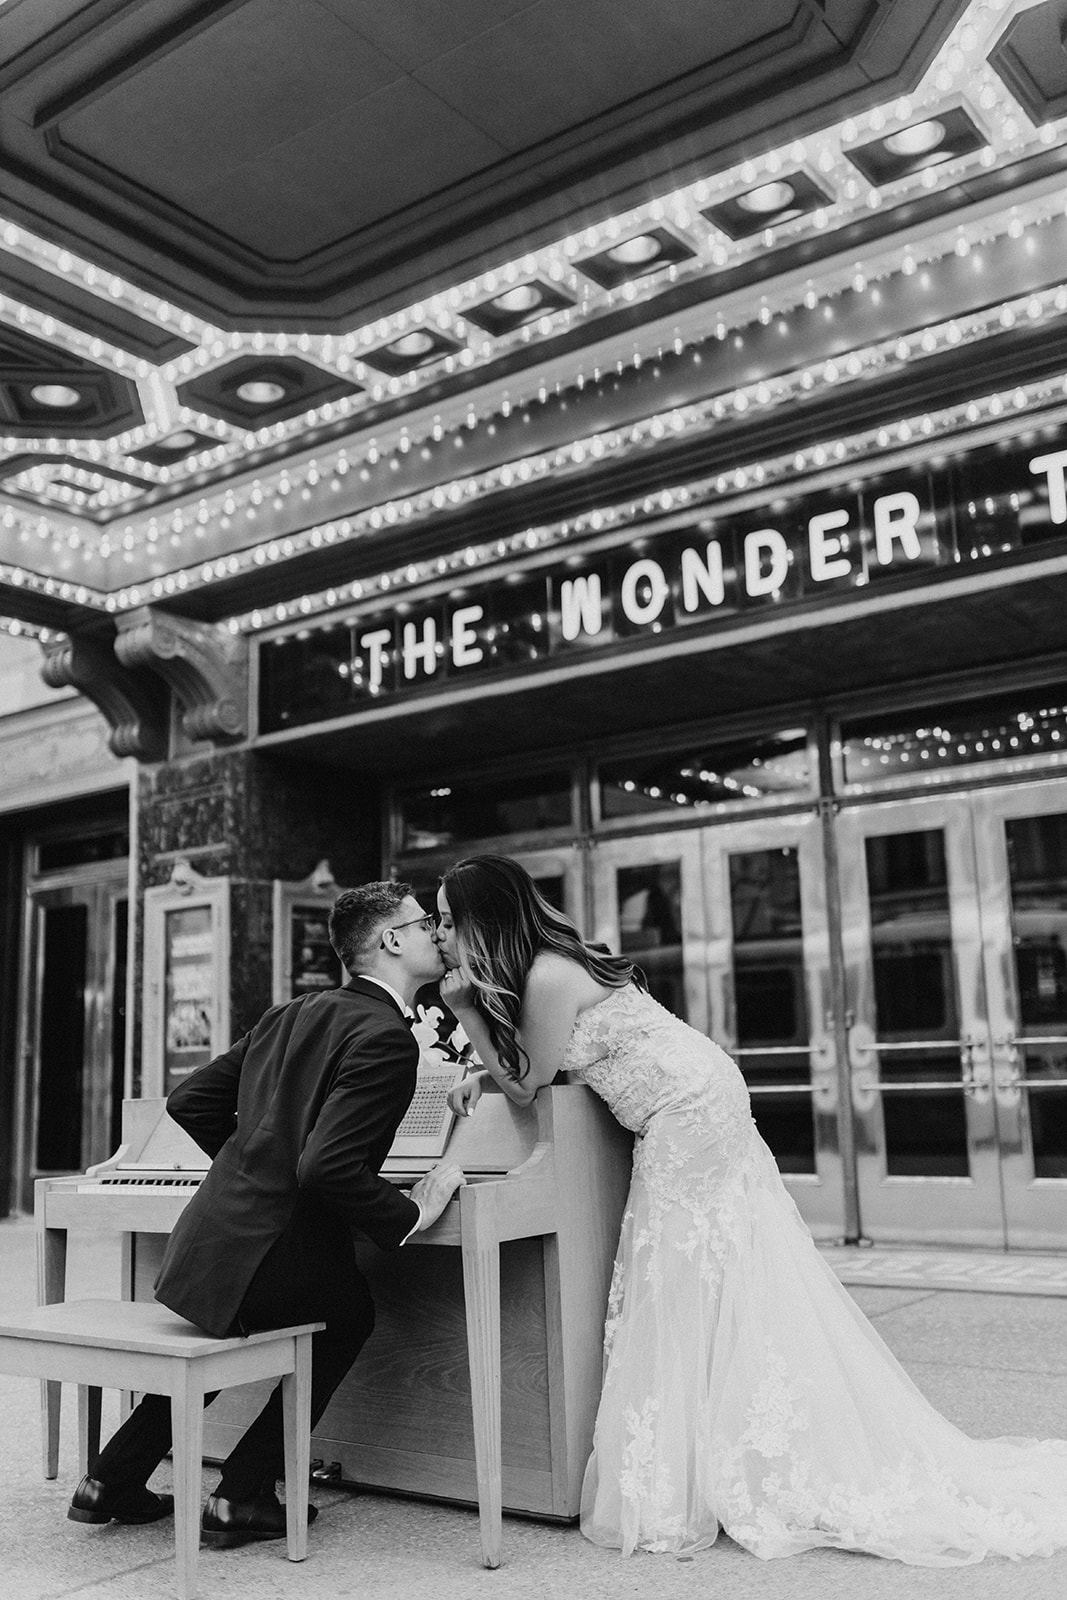 Classic wedding at the Curtiss Hotel downtoan Buffalo, NY